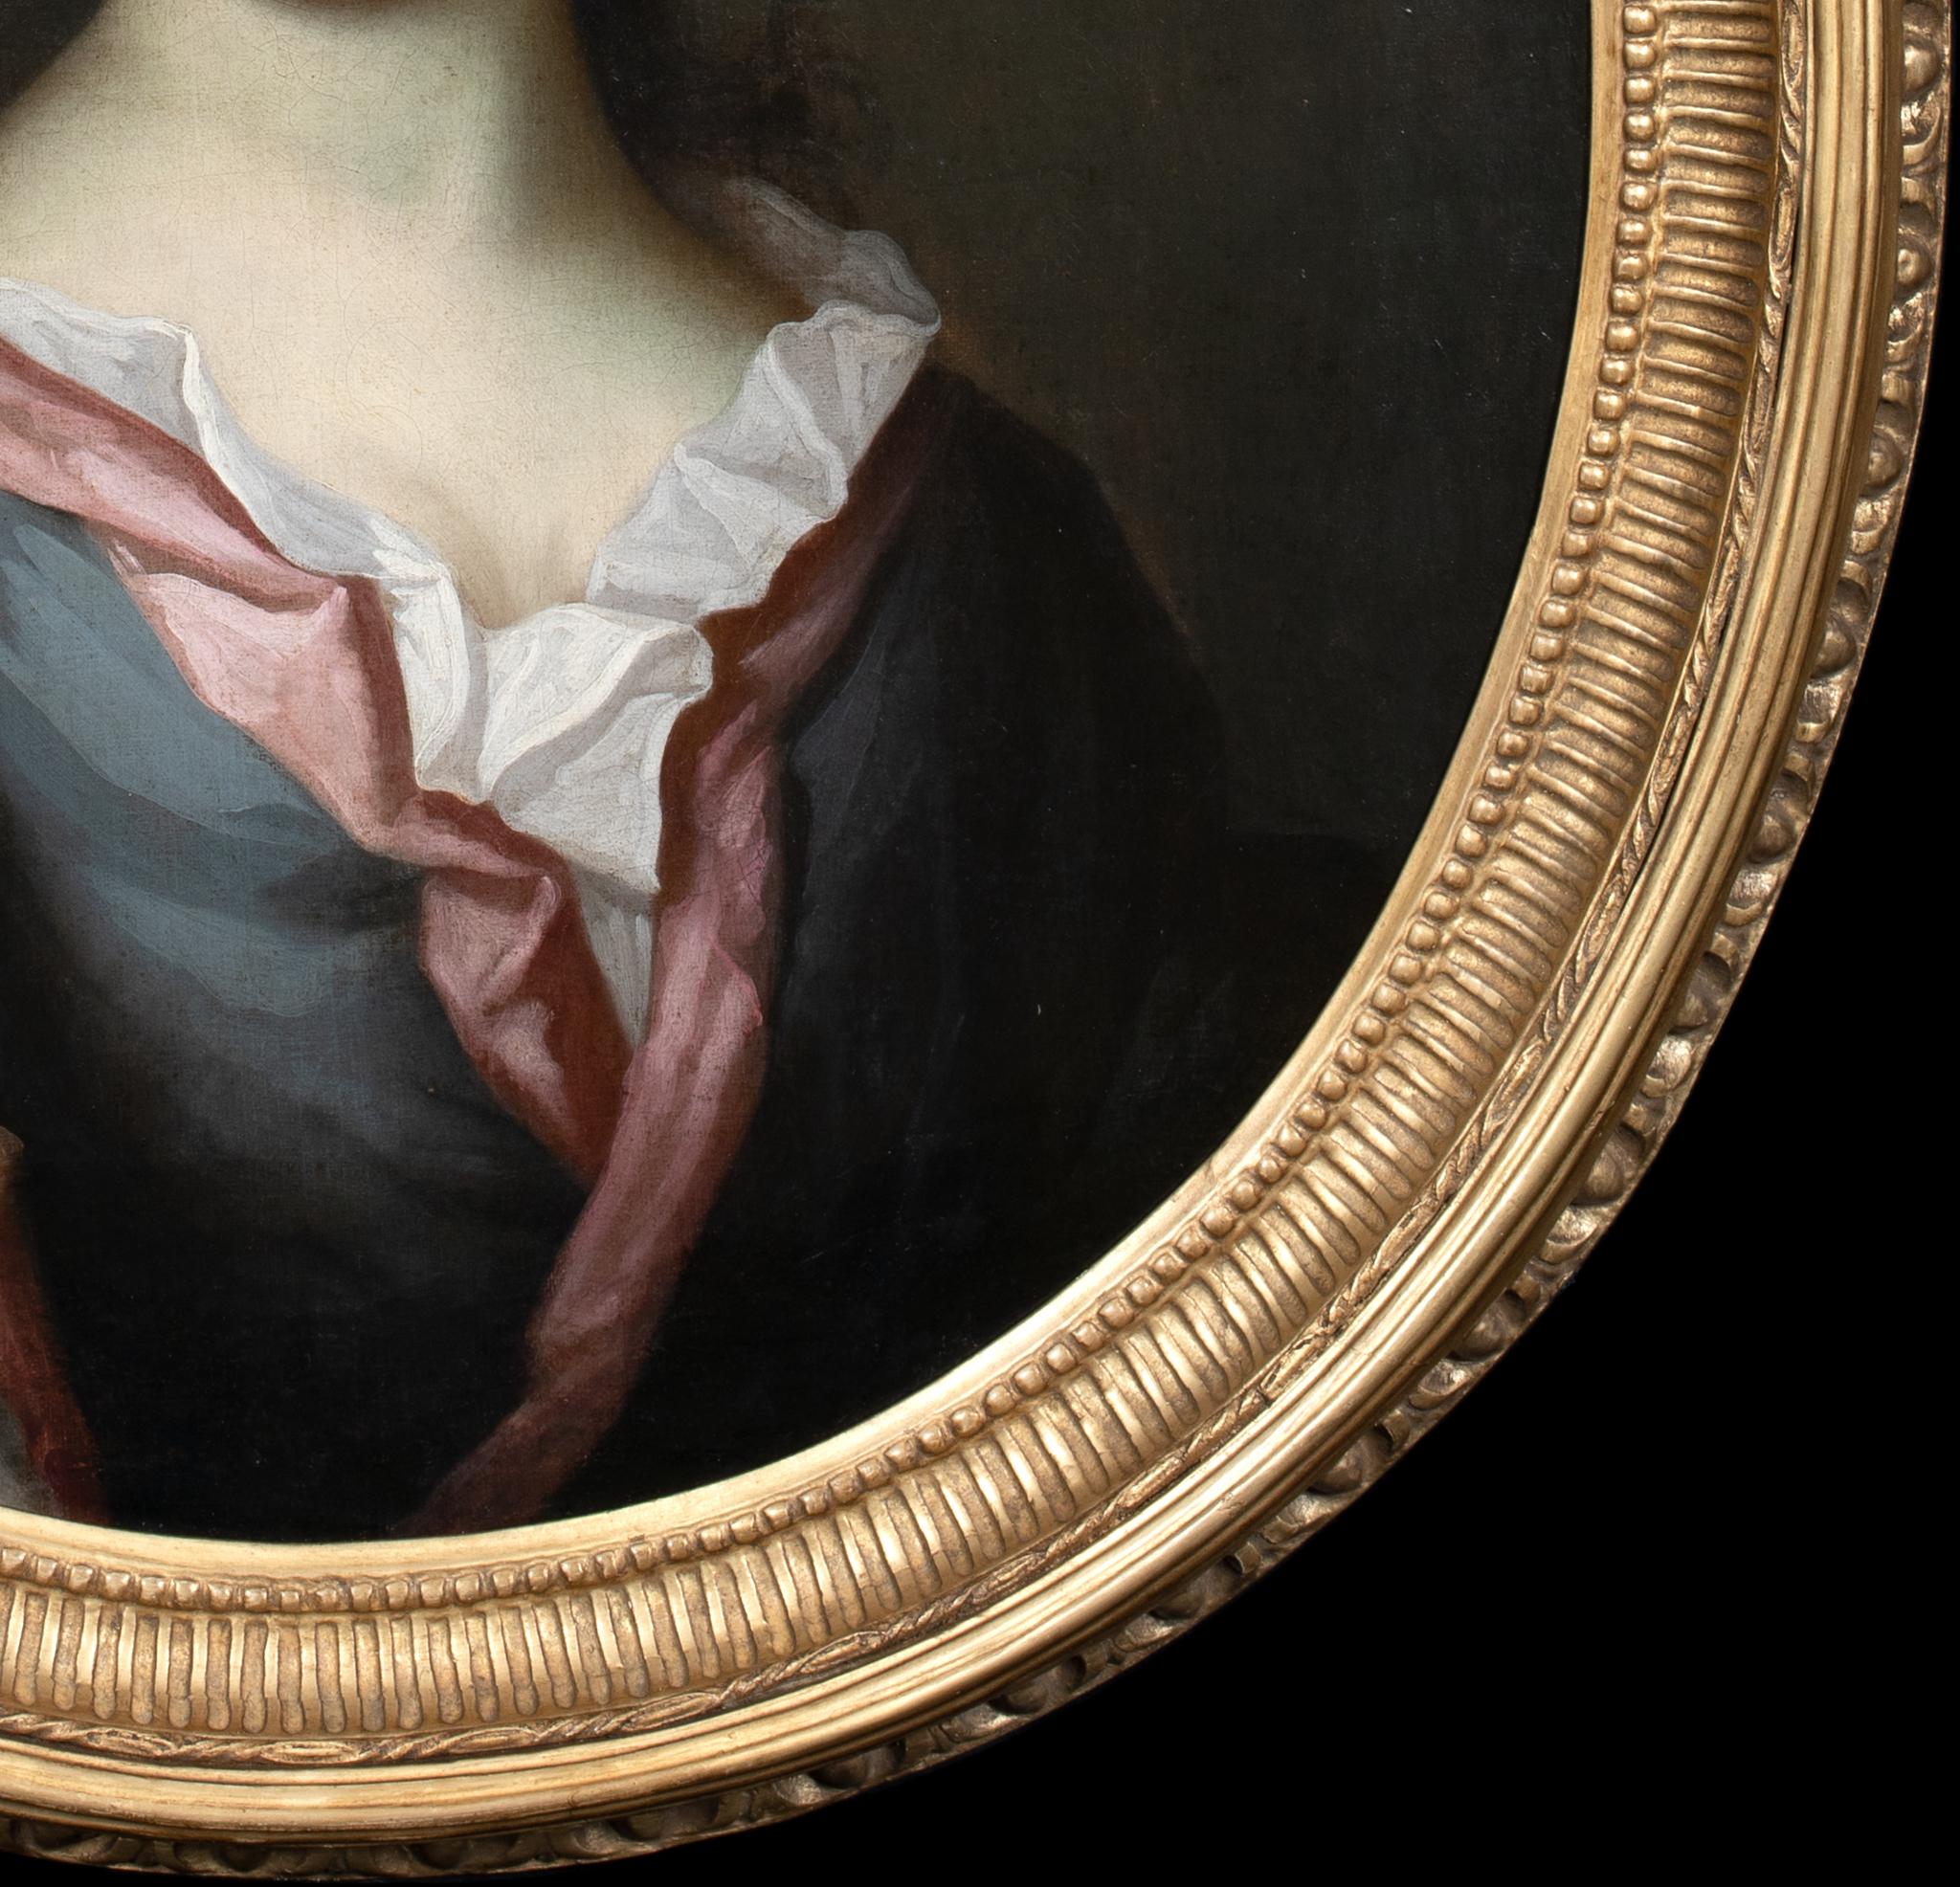 Lady Selby Of Melton. circa 1710

attributed to SIR GODFREY KNELLER (1646-1723)

Large circa 1710 portrait of Lady Selby of Melton, oil on canvas attributed to Sir Godfrey Kneller. Excellent quality and condition oval bust scale portrait of the